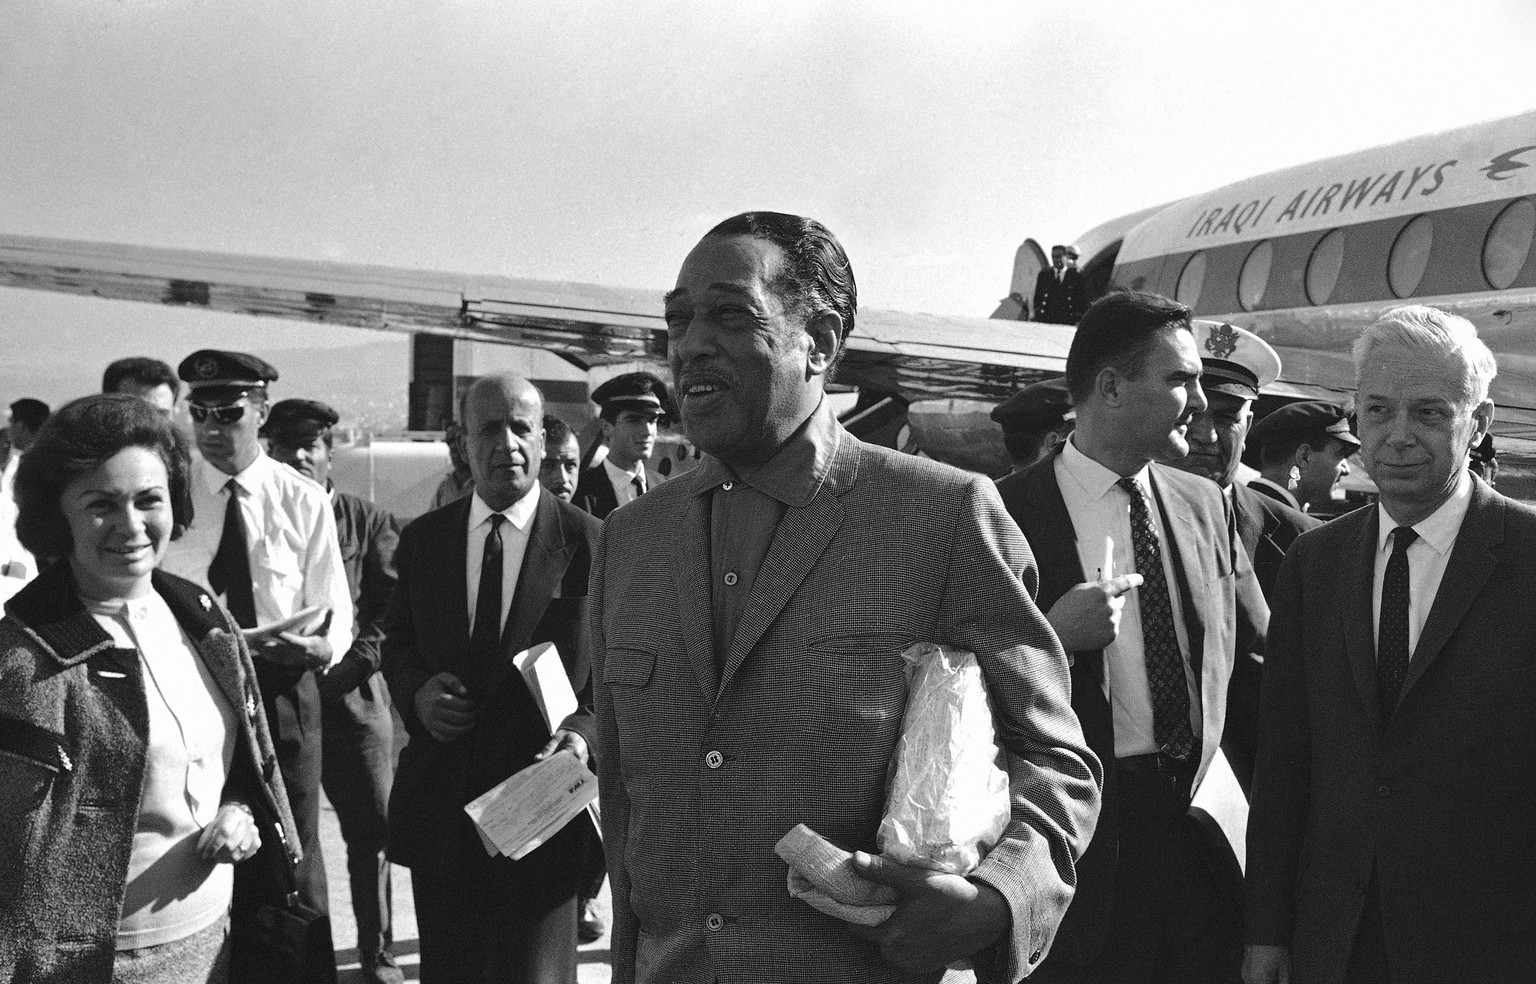 Famous American Jazzman Duke Ellington on a good-will tour sponsored by the United States state department, arrived in Beirut, Nov. 19, 1963 after spending four days in Baghdad. Pictures are general s ...